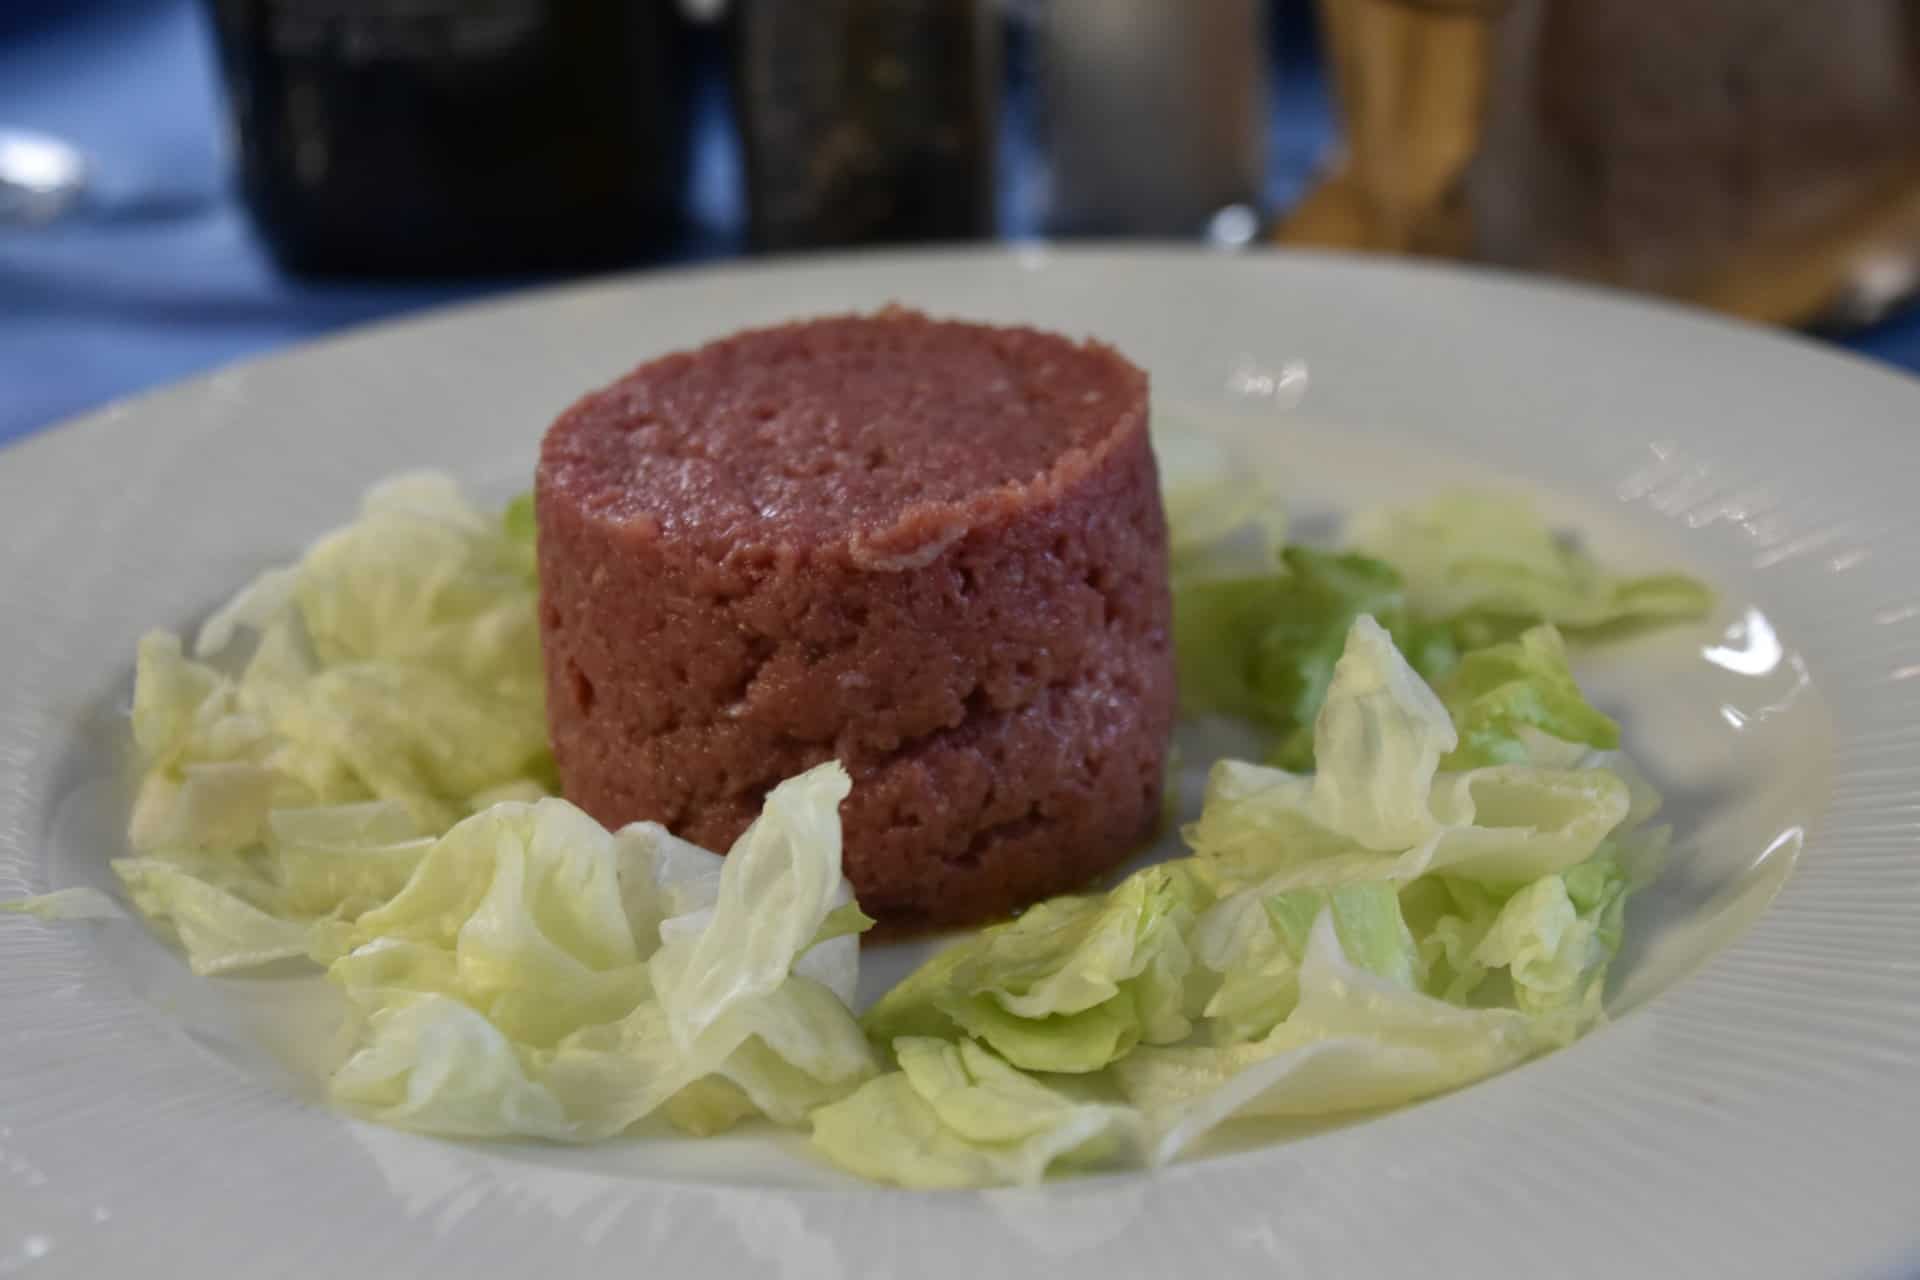 tartare at Hotel Bucaneve, a restaurant in Pre Saint Didier in Valle d'Aosta, Italy